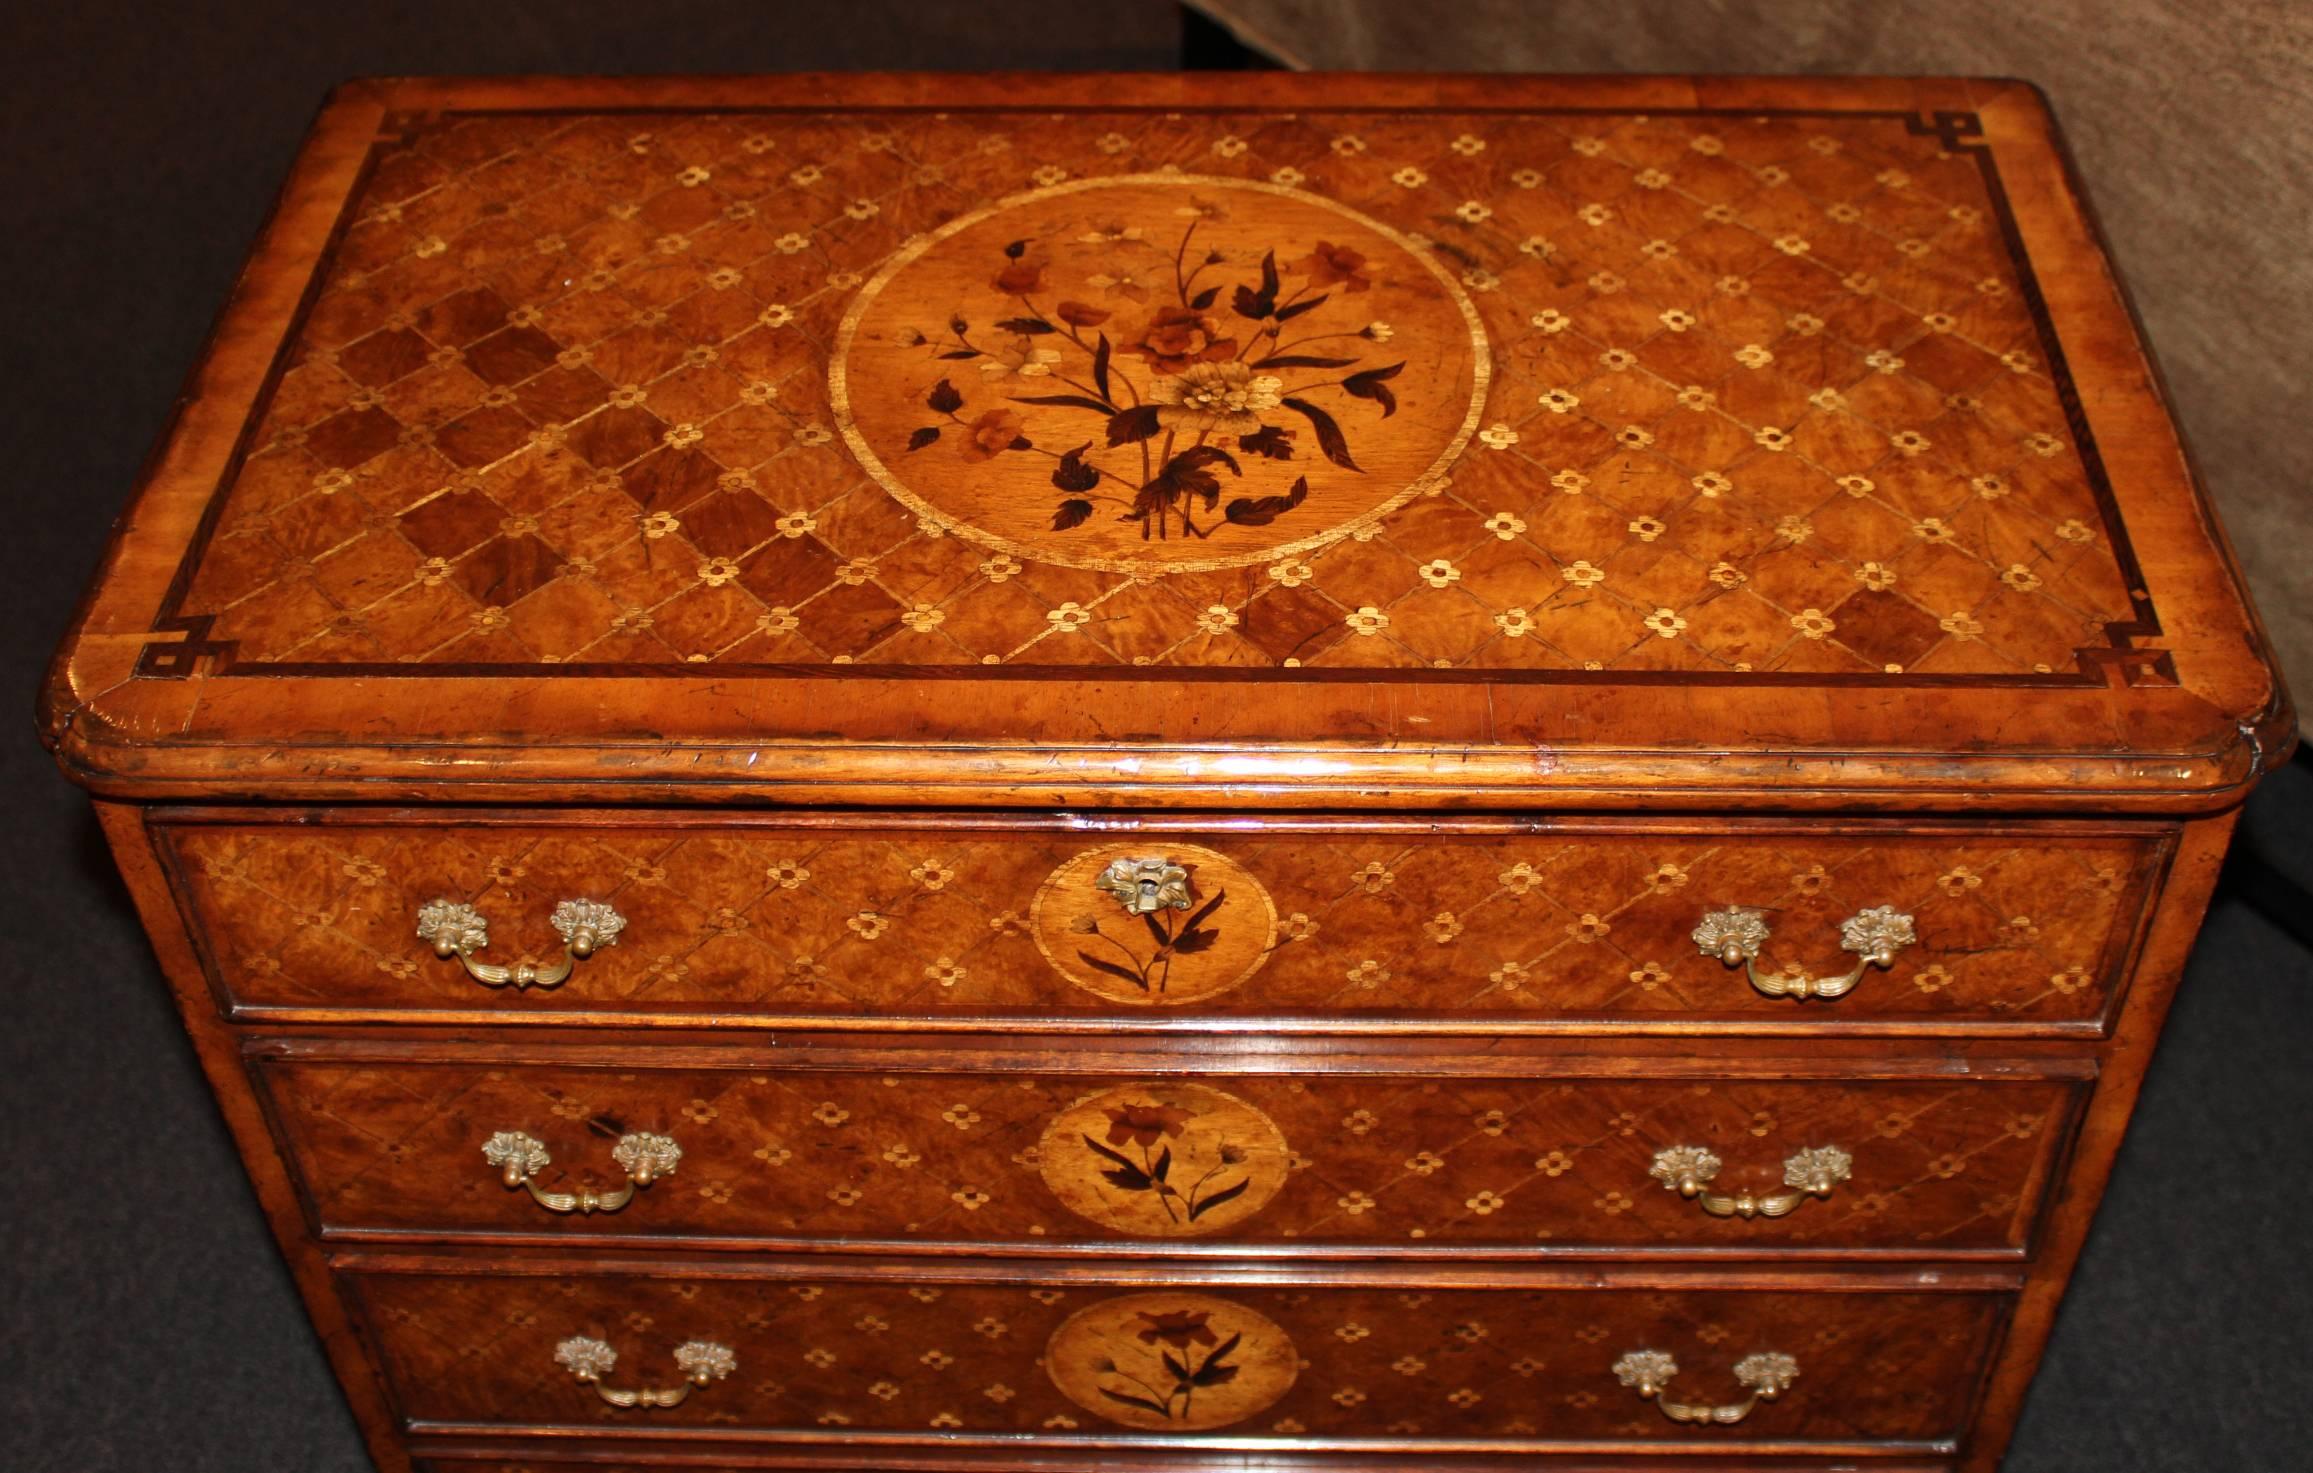 Hand-Carved Diminutive English Four-Drawer Chest with Extensive Marquetry